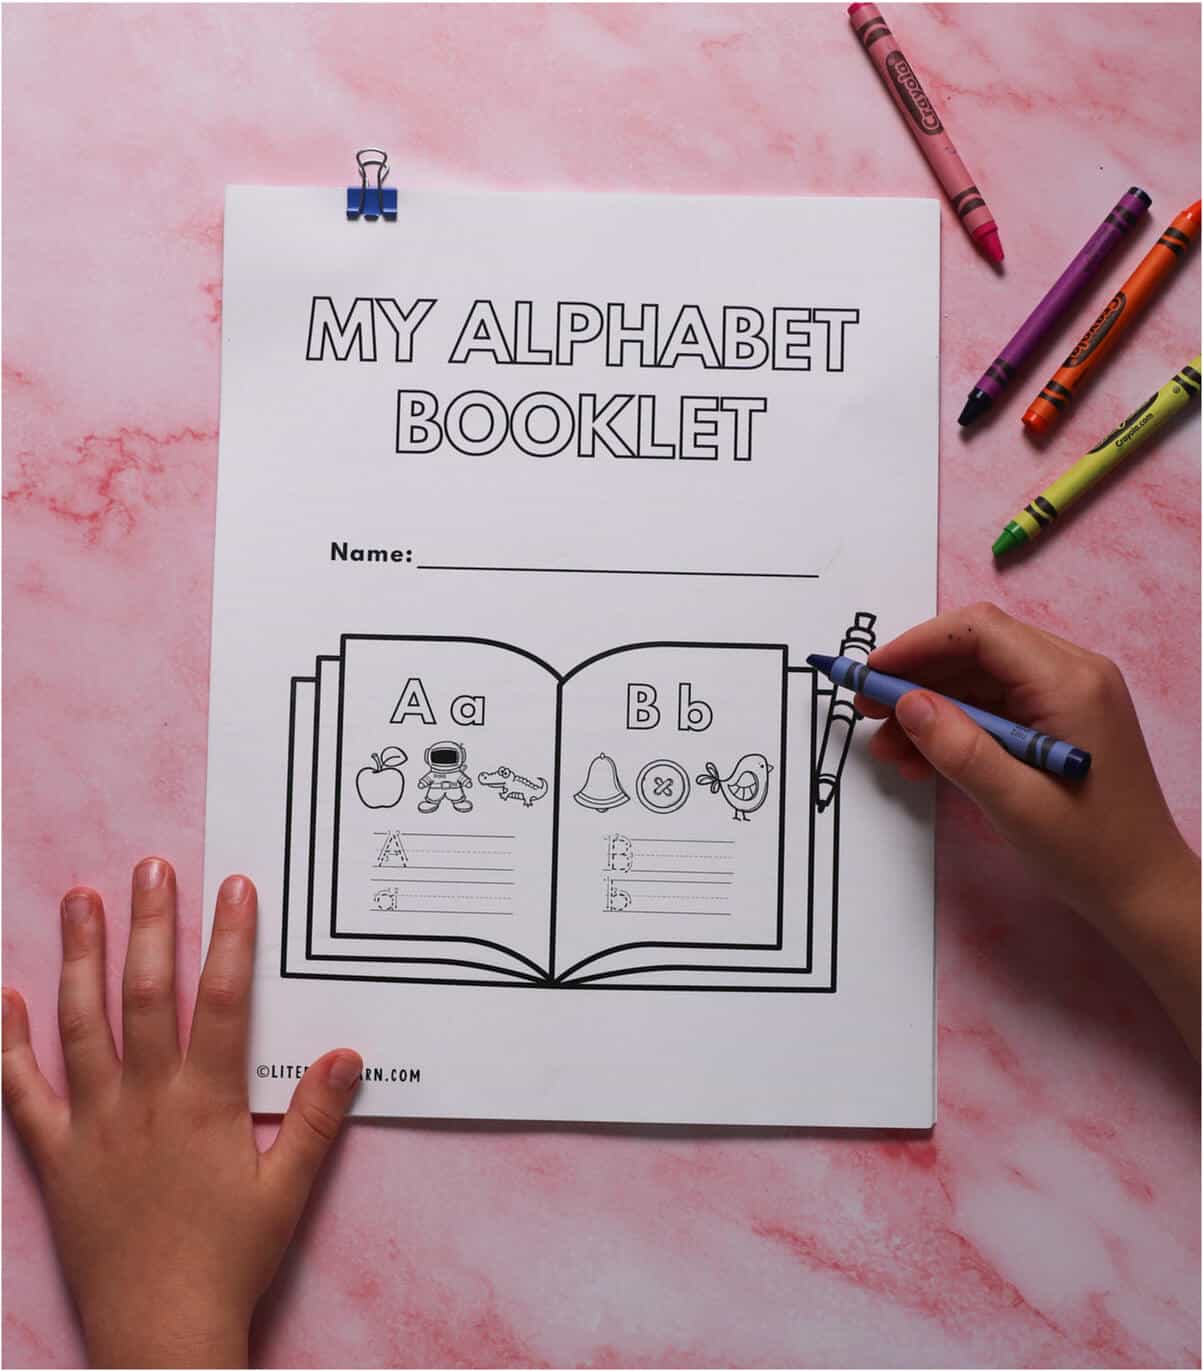 A child writing on the cover of the "My Alphabet Booklet" workbook.